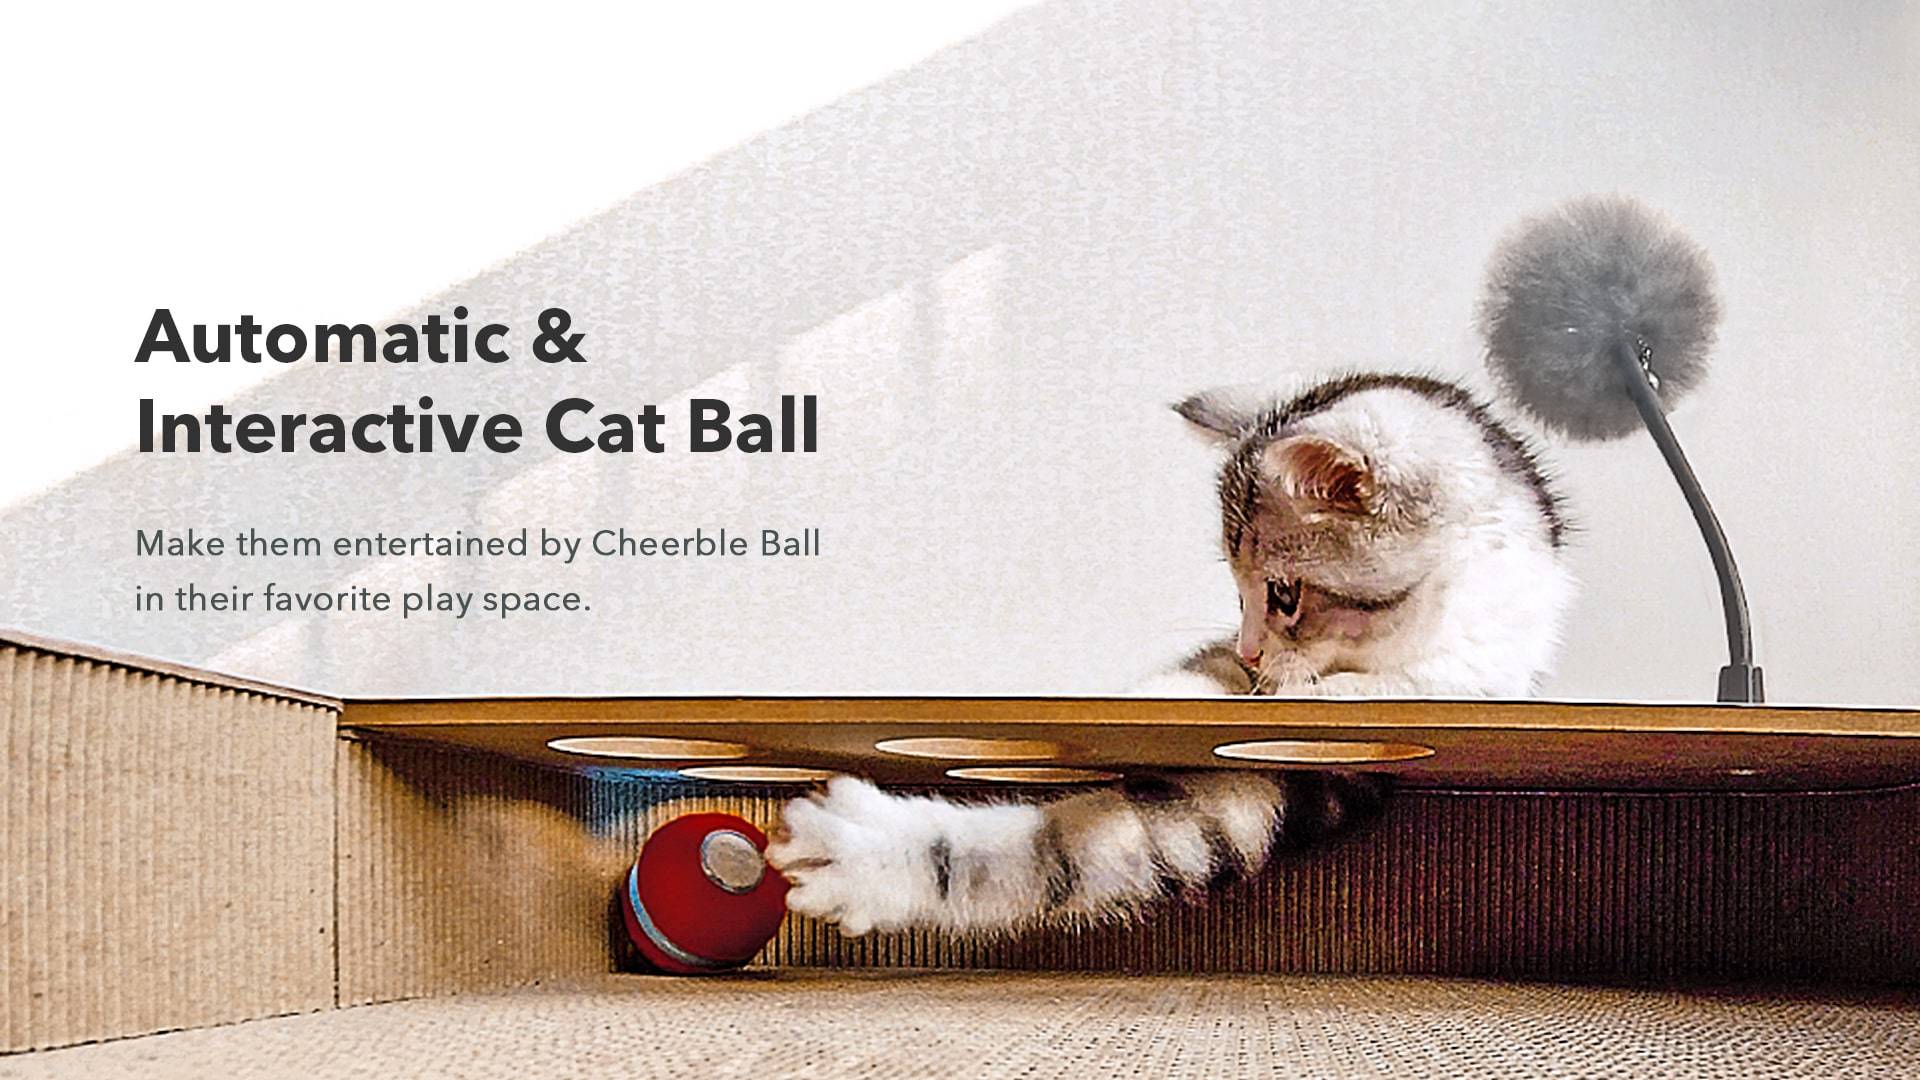 Automatic & Interactive Cat Ball